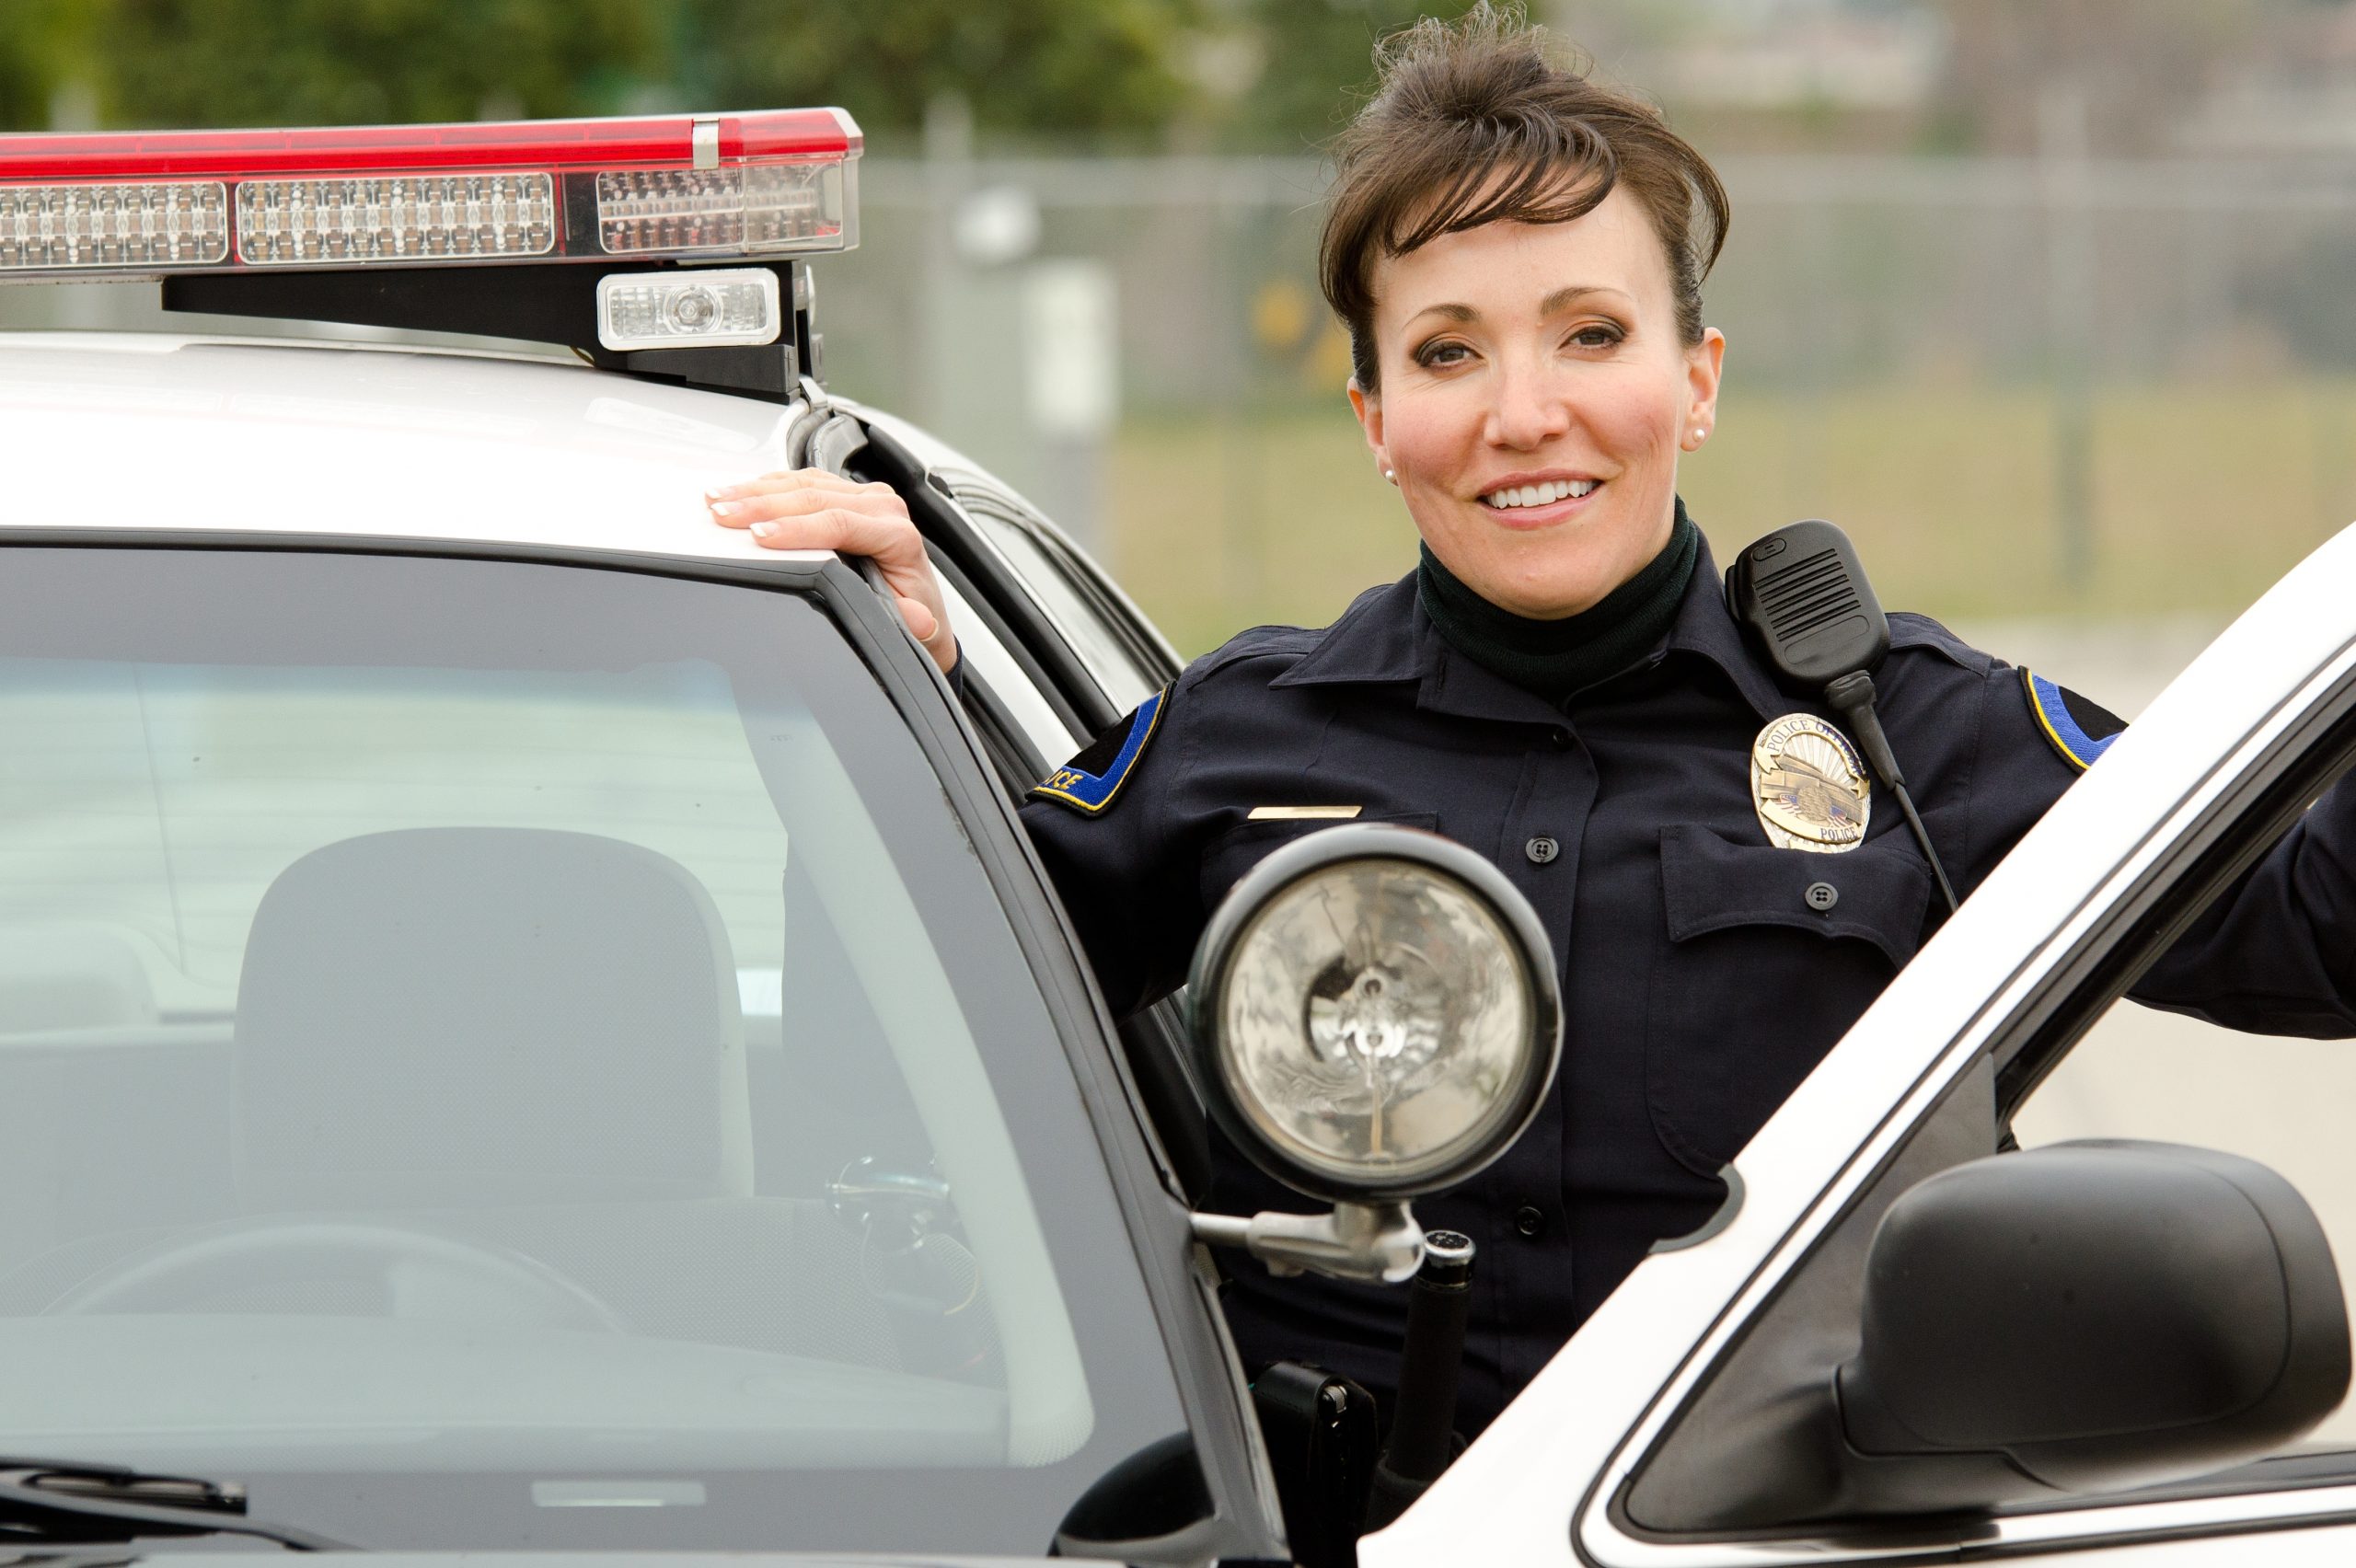 Woman police officer smiles at police car